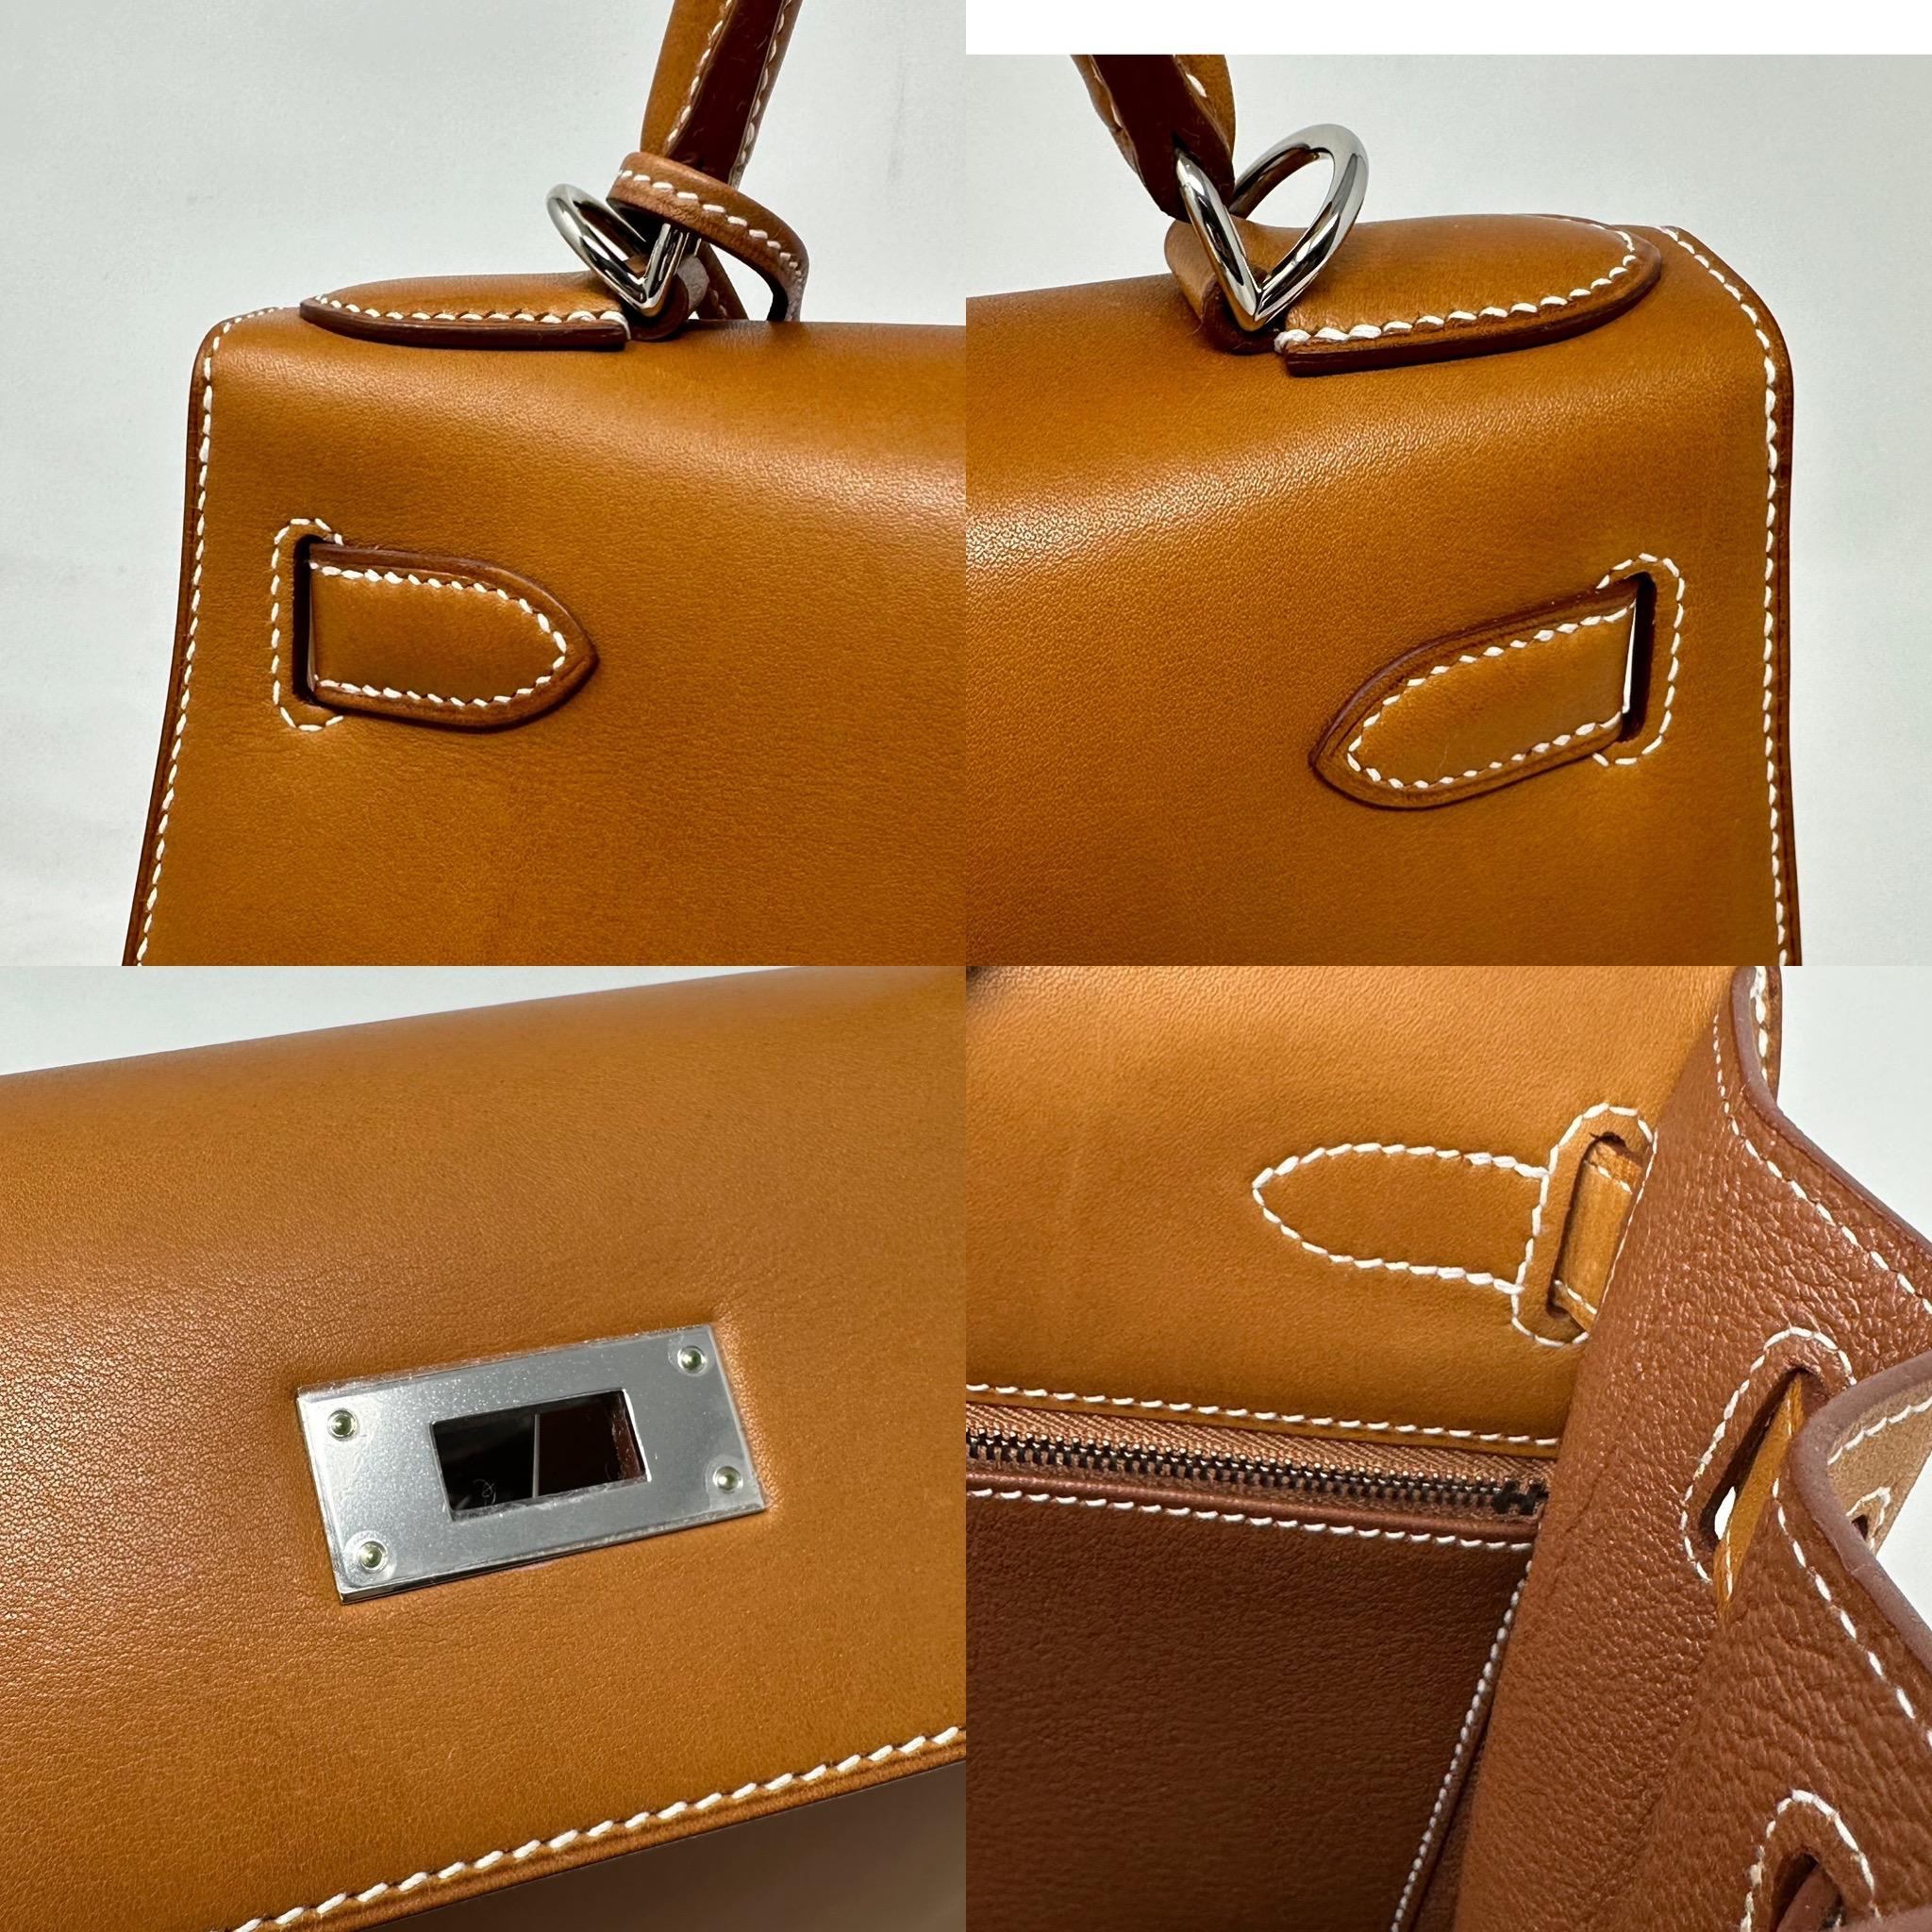 Description: This is a beautiful Like New Hermès Kelly 28 Sellier Bag crafted from highly sought after Natural Barenia Leather in brown hue with the palladium-plated hardware. The bag features contrast stitching, a leather top handle, an optional